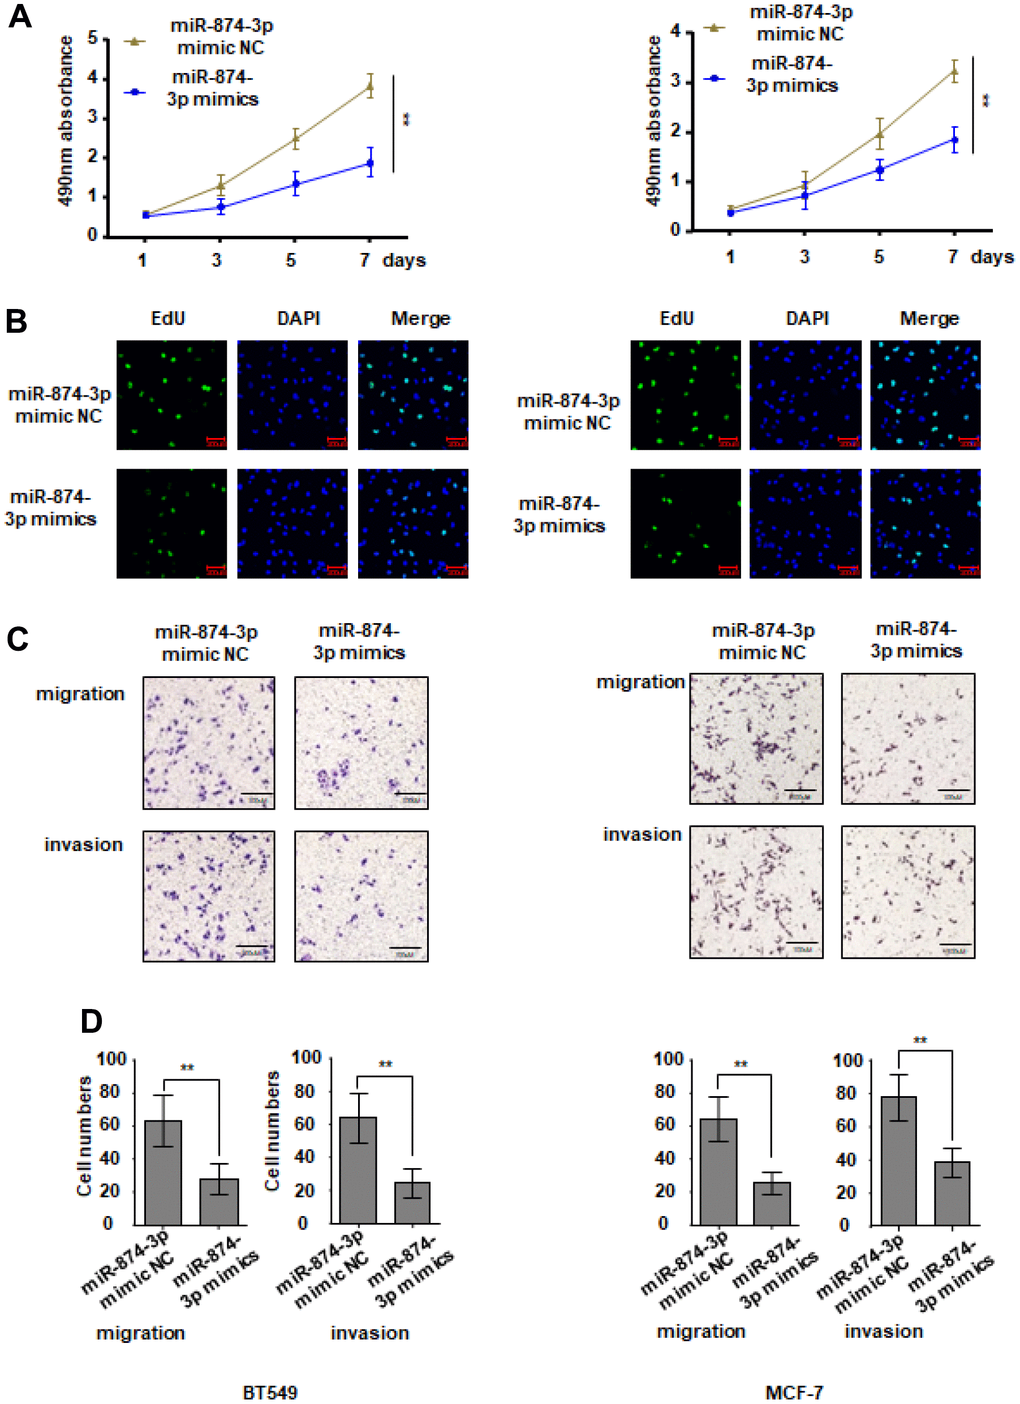 miR-874-3p inhibits proliferation, migration and invasion of breast cancer cells. MCF-7 and BT549 cells were transduced with miR-874-3p mimic NC or miR-874-3p mimics. (A, B) Cell proliferation was detected with CCK8 assay (A) and EDU assay (B). (C, D) Transwell assay was used to detect cell migration and invasion ability. The data are presented as the mean ± S.D. *P 